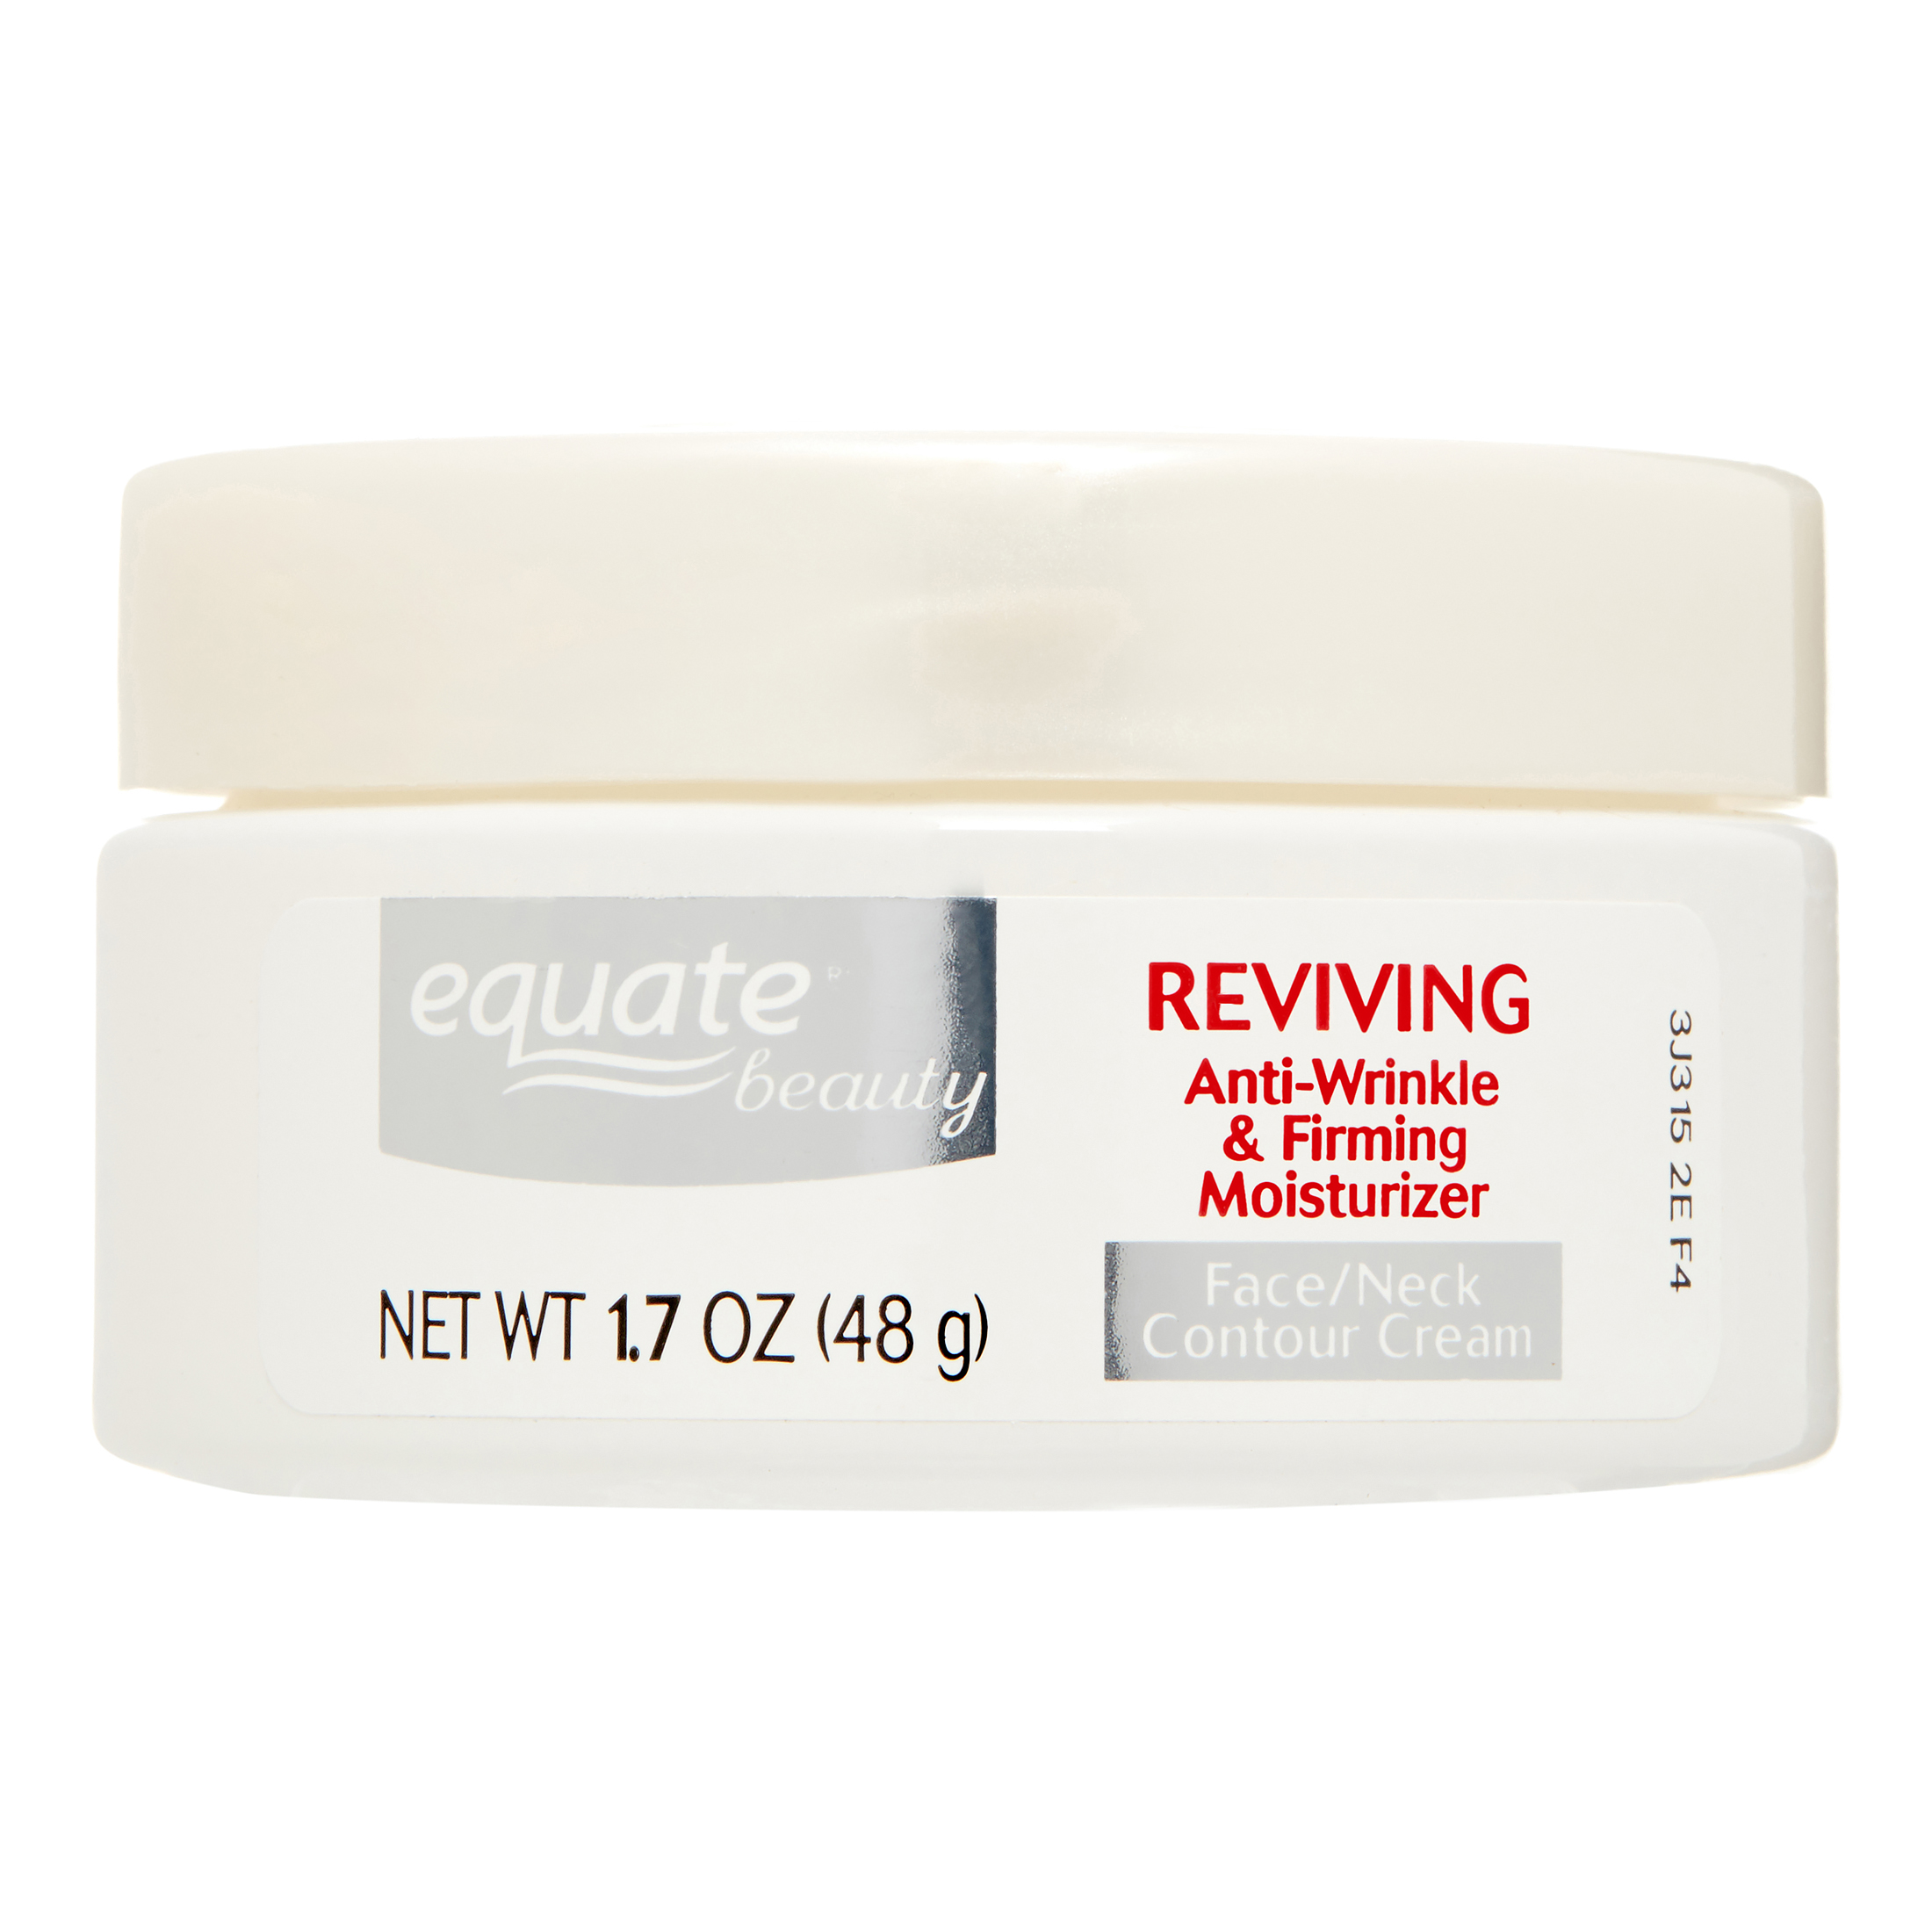 Equate Advanced Firming & Anti-Wrinkle Cream Face and Neck Moisturizer, 1.7oz - image 1 of 9